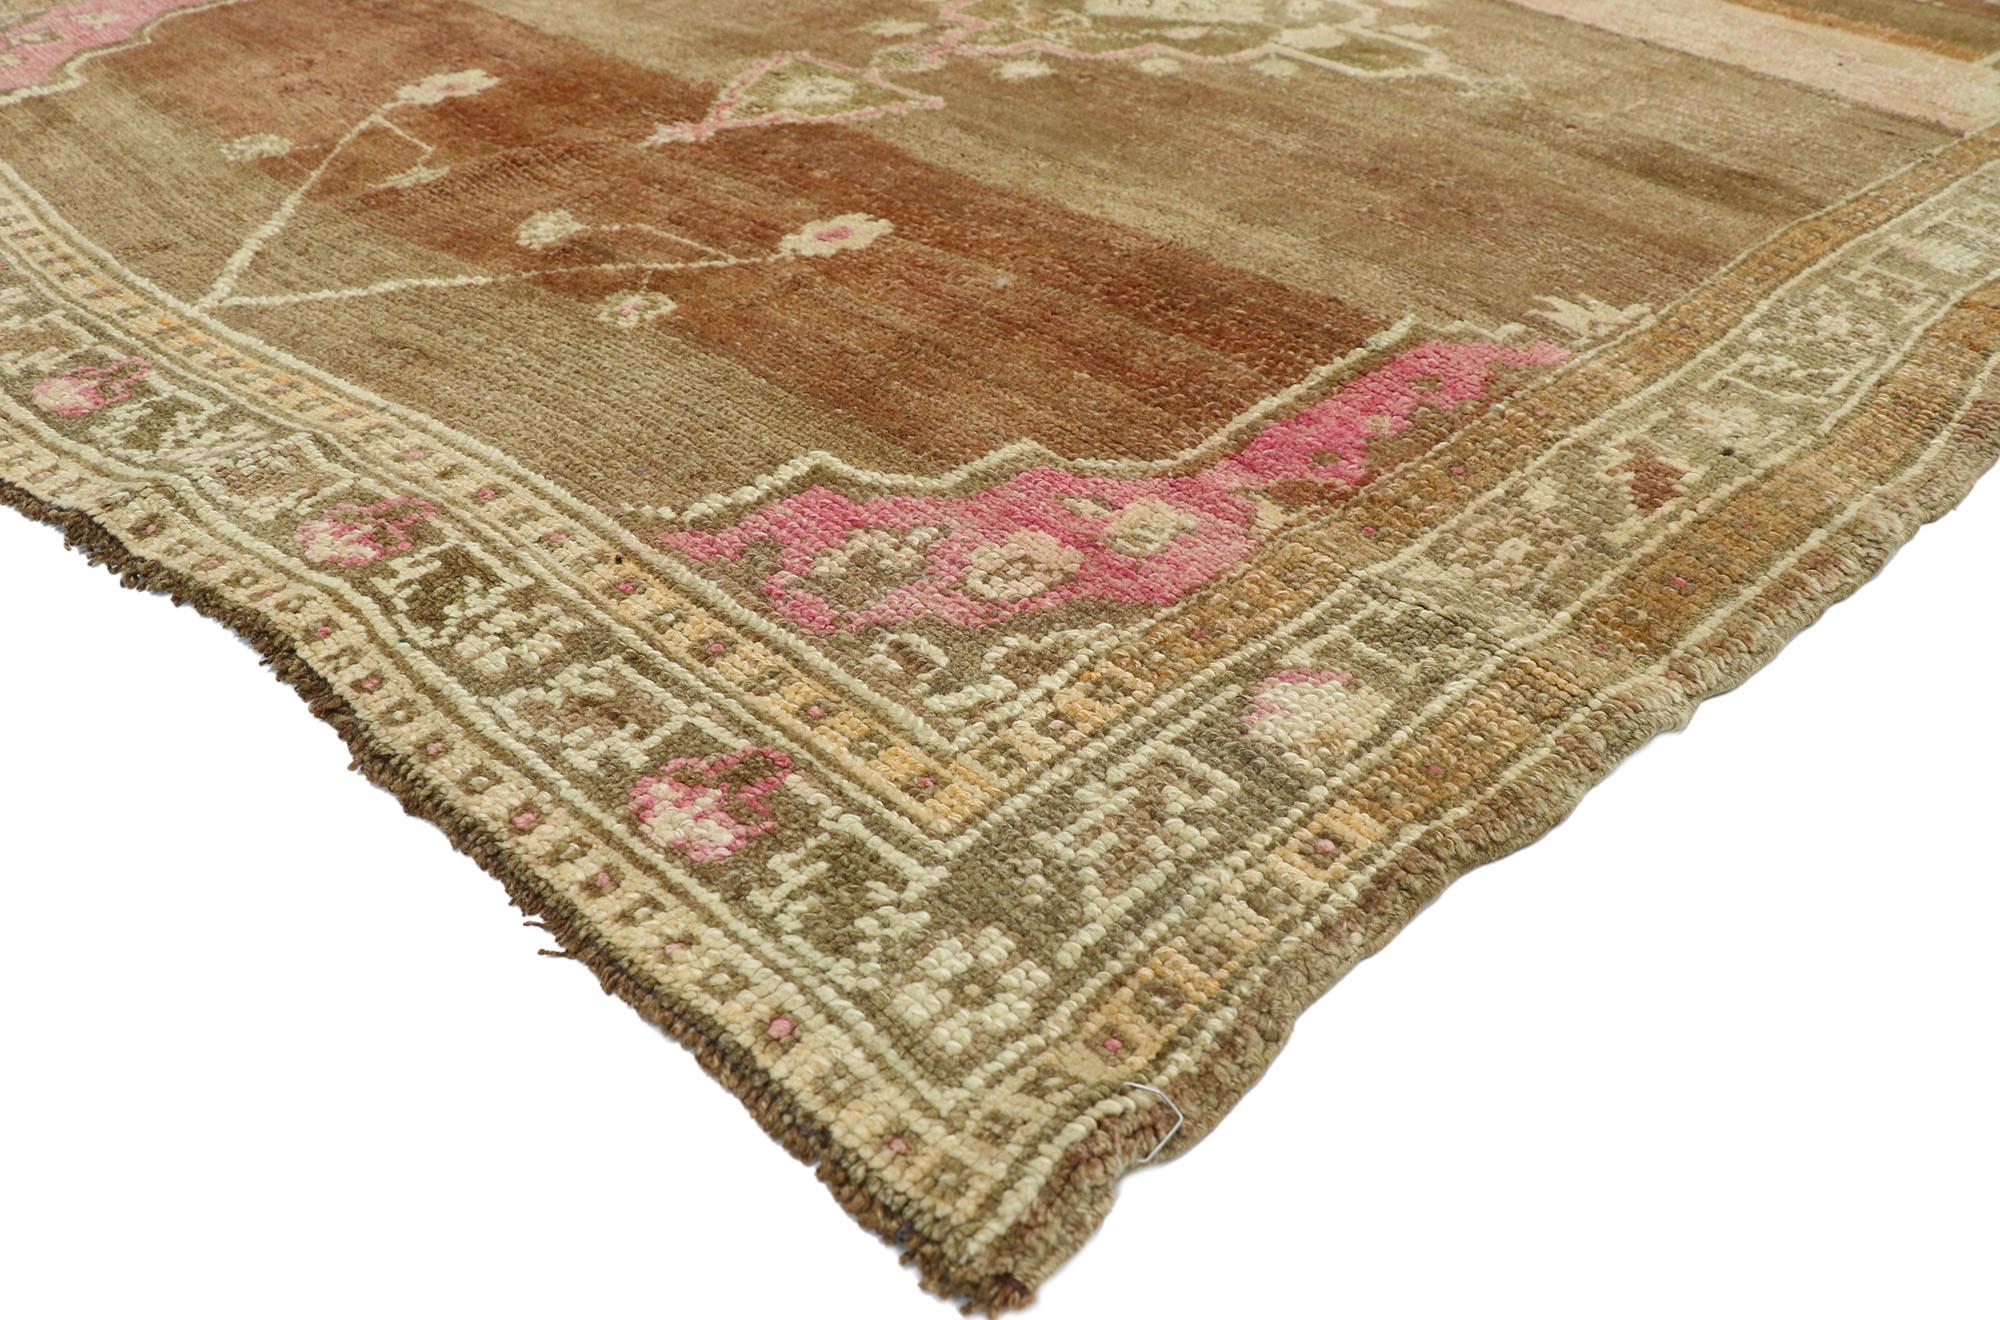 52766, vintage Turkish Kars rug with romantic Mid-Century Modern style 05'11 x 07'00. Warm and inviting, this hand knotted wool vintage Kars rug with Mid-Century Modern style features a central medallion with trefoil anchors on either side. The rich